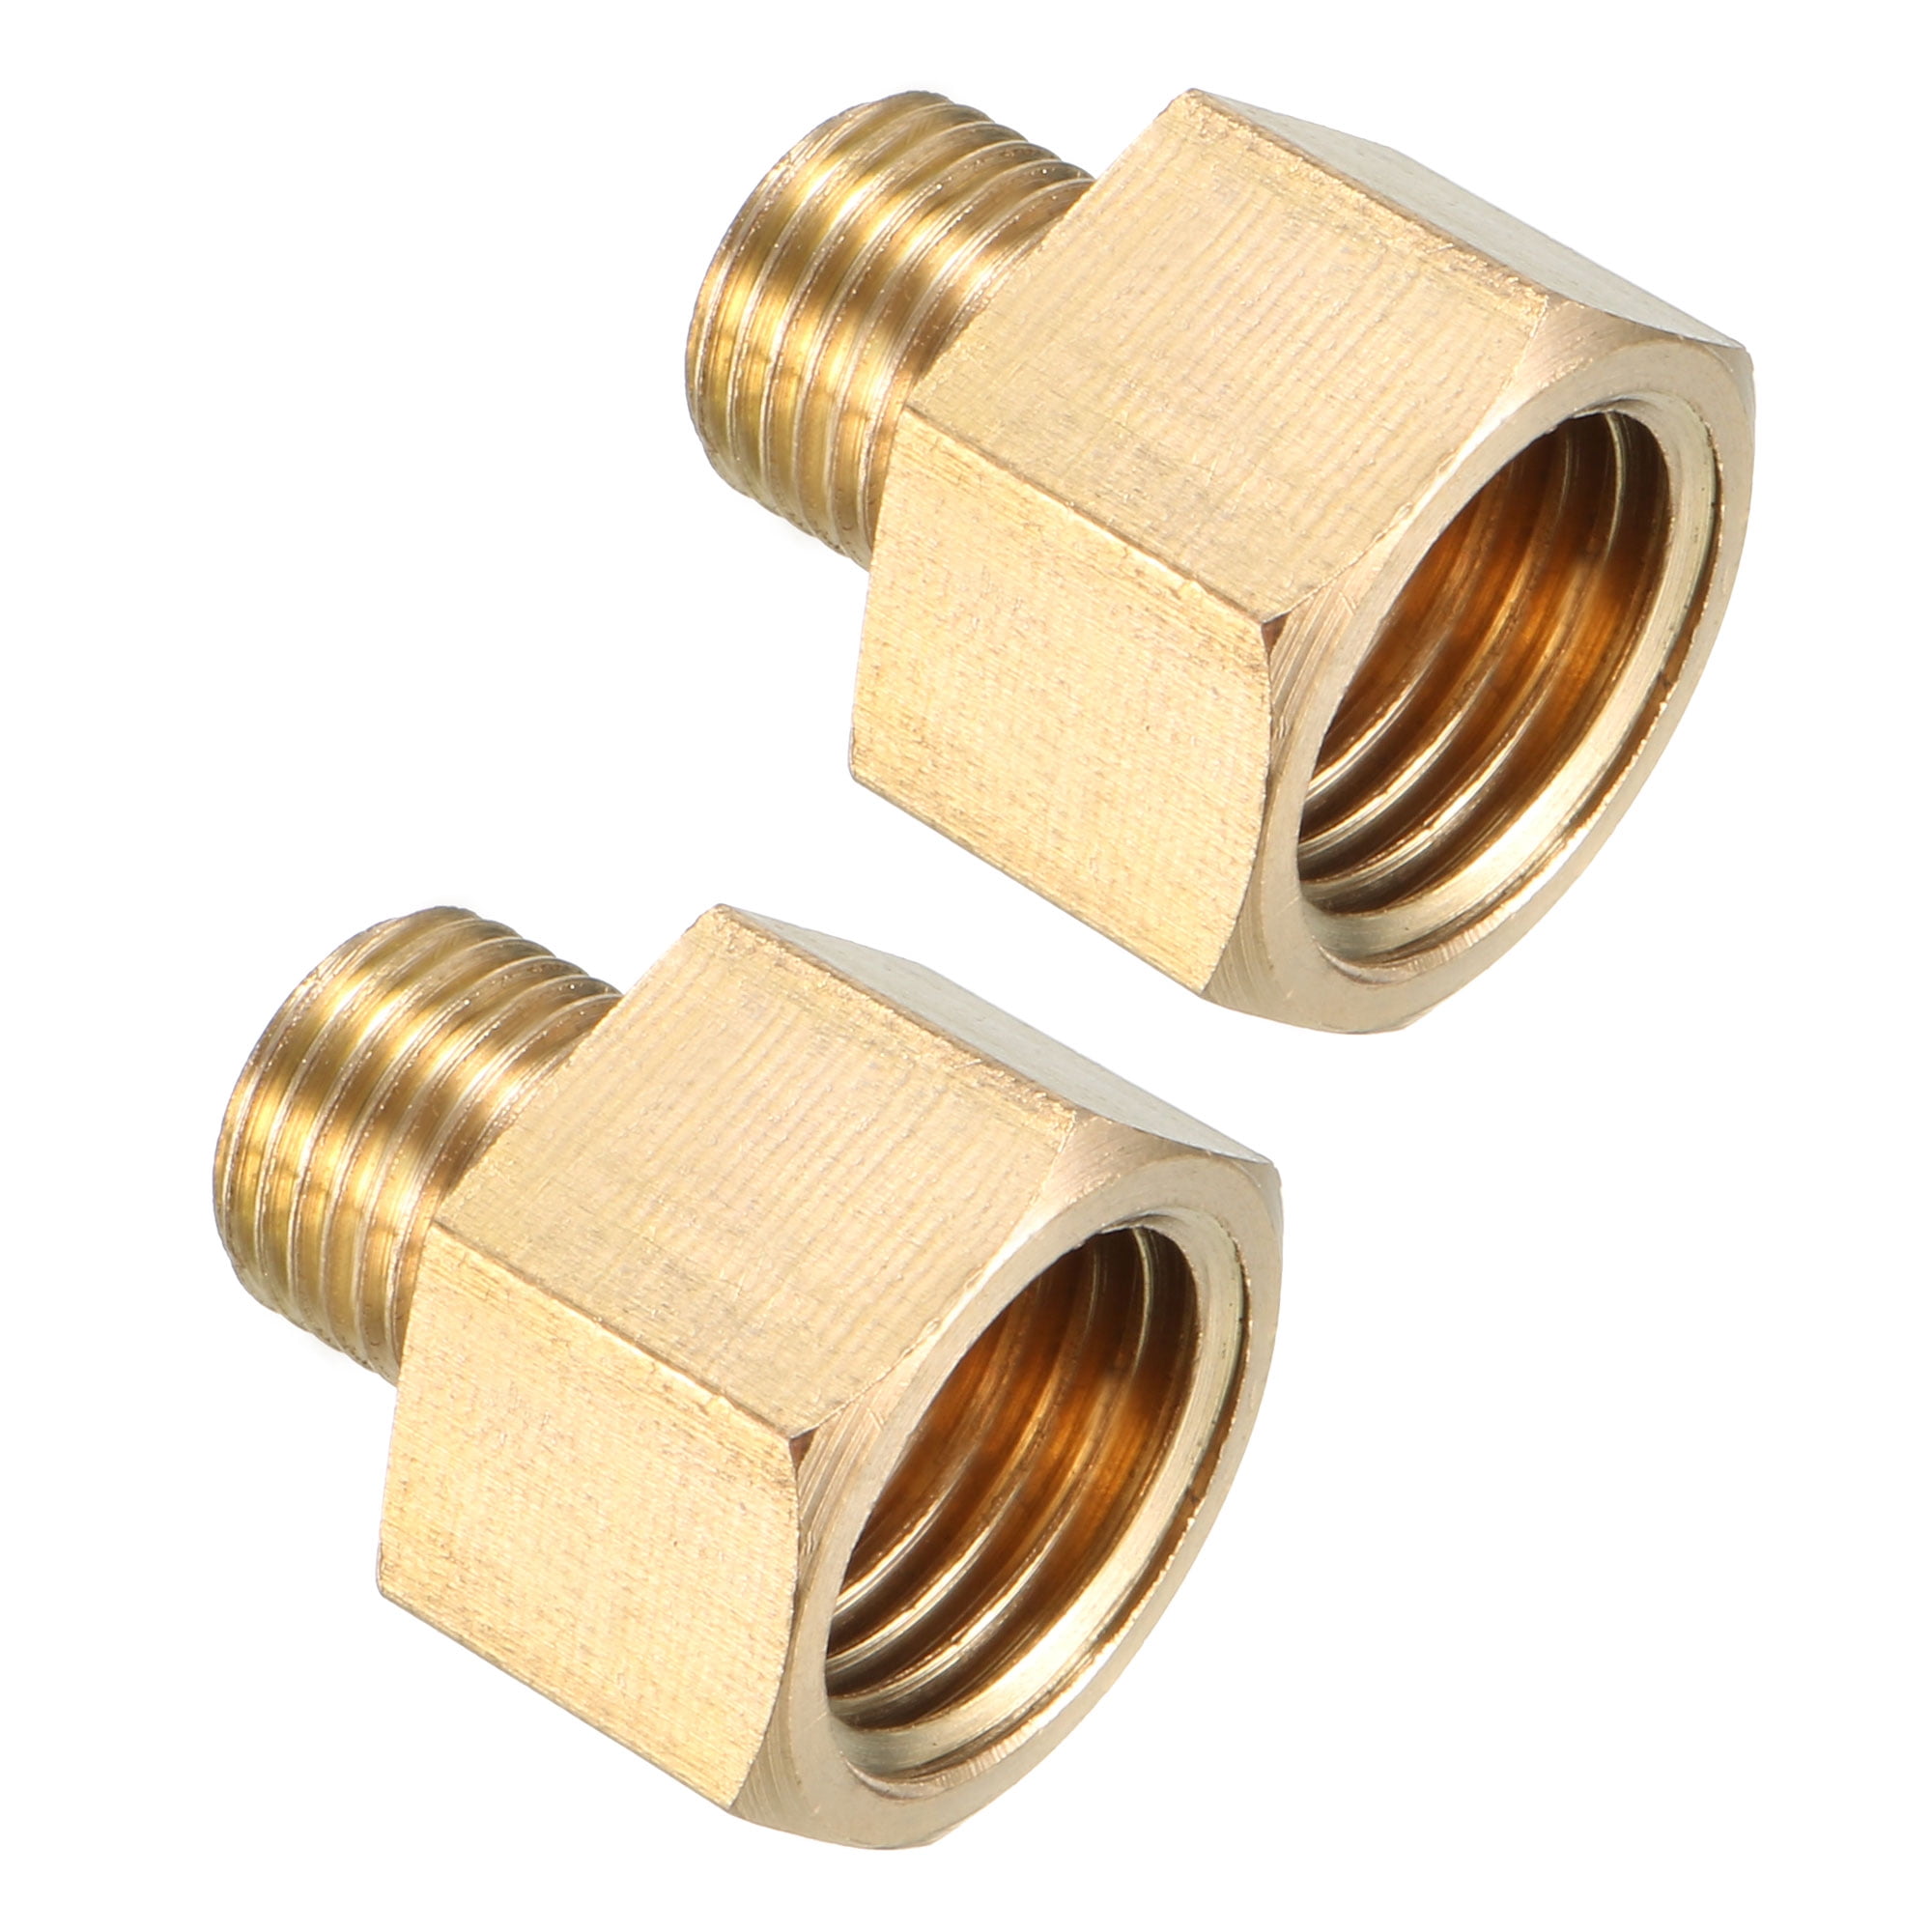 Brass Female Thread Fitting 1/4" 90 Degree Pneumatic Hose Connector Adapter 